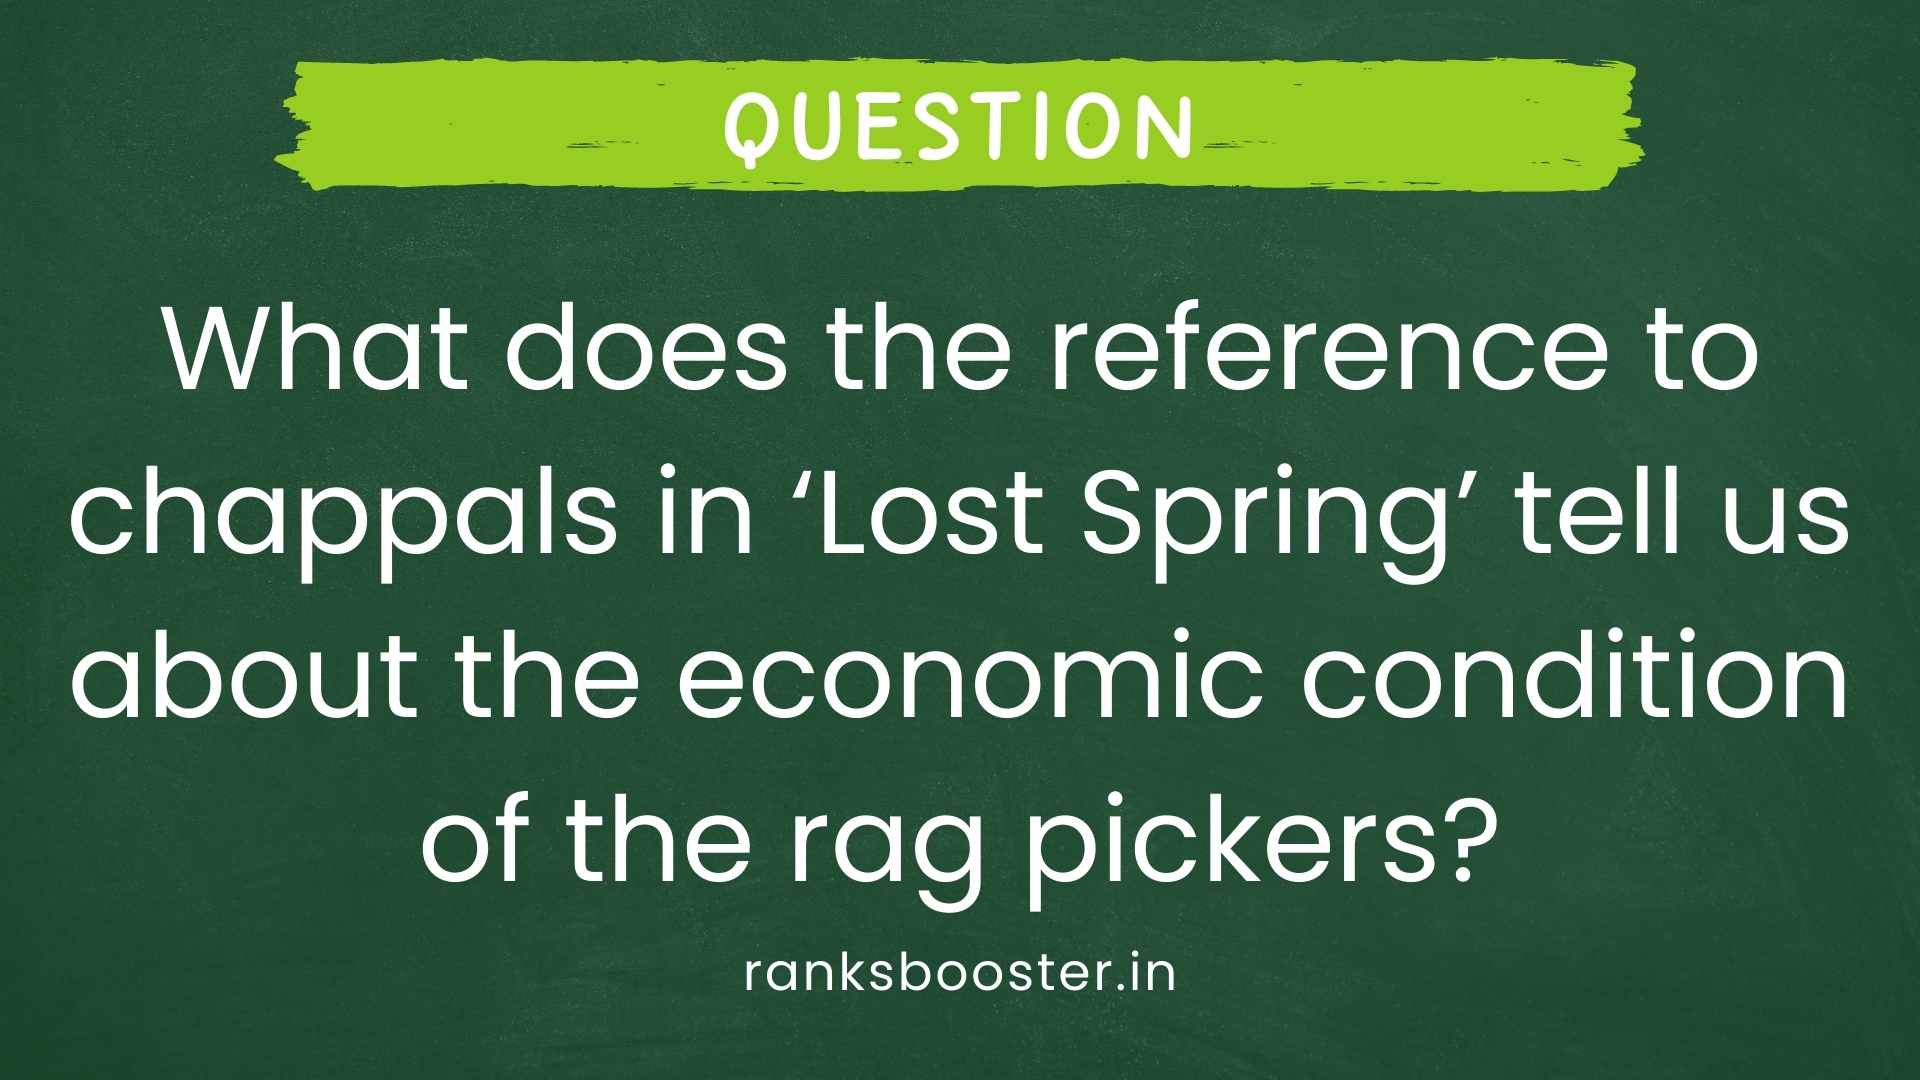 Question: What does the reference to chappals in ‘Lost Spring’ tell us about the economic condition of the rag pickers? [CBSE (AI) 2016]